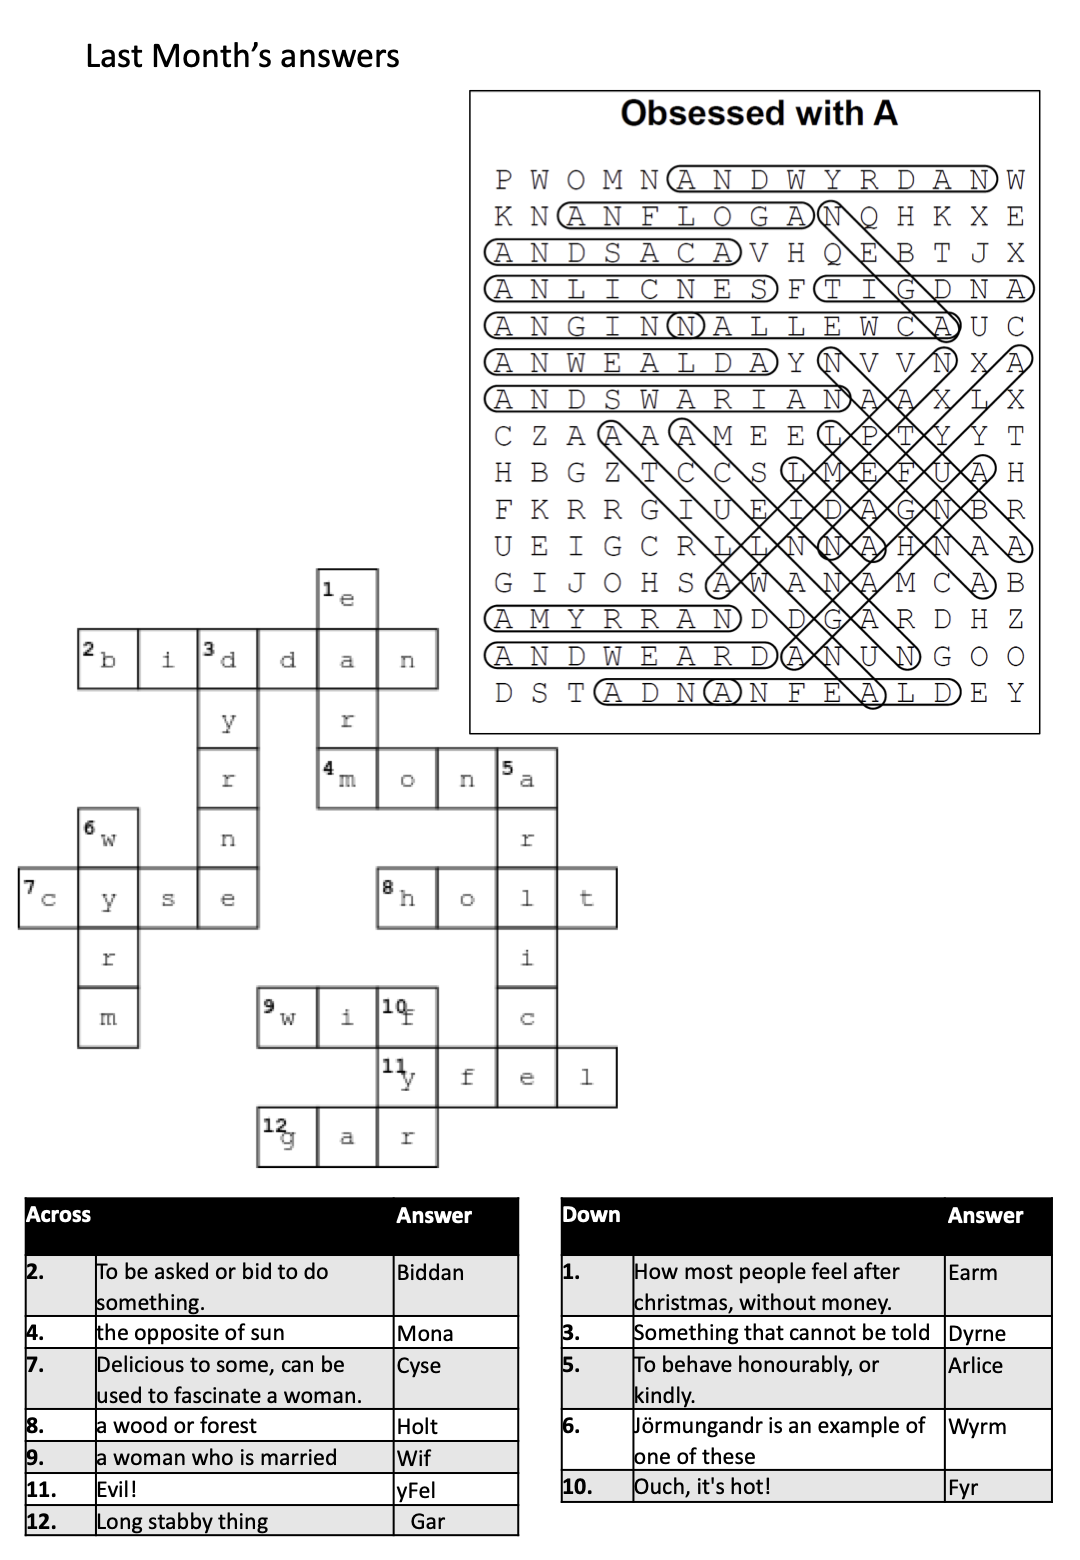 Completed word search and crossword